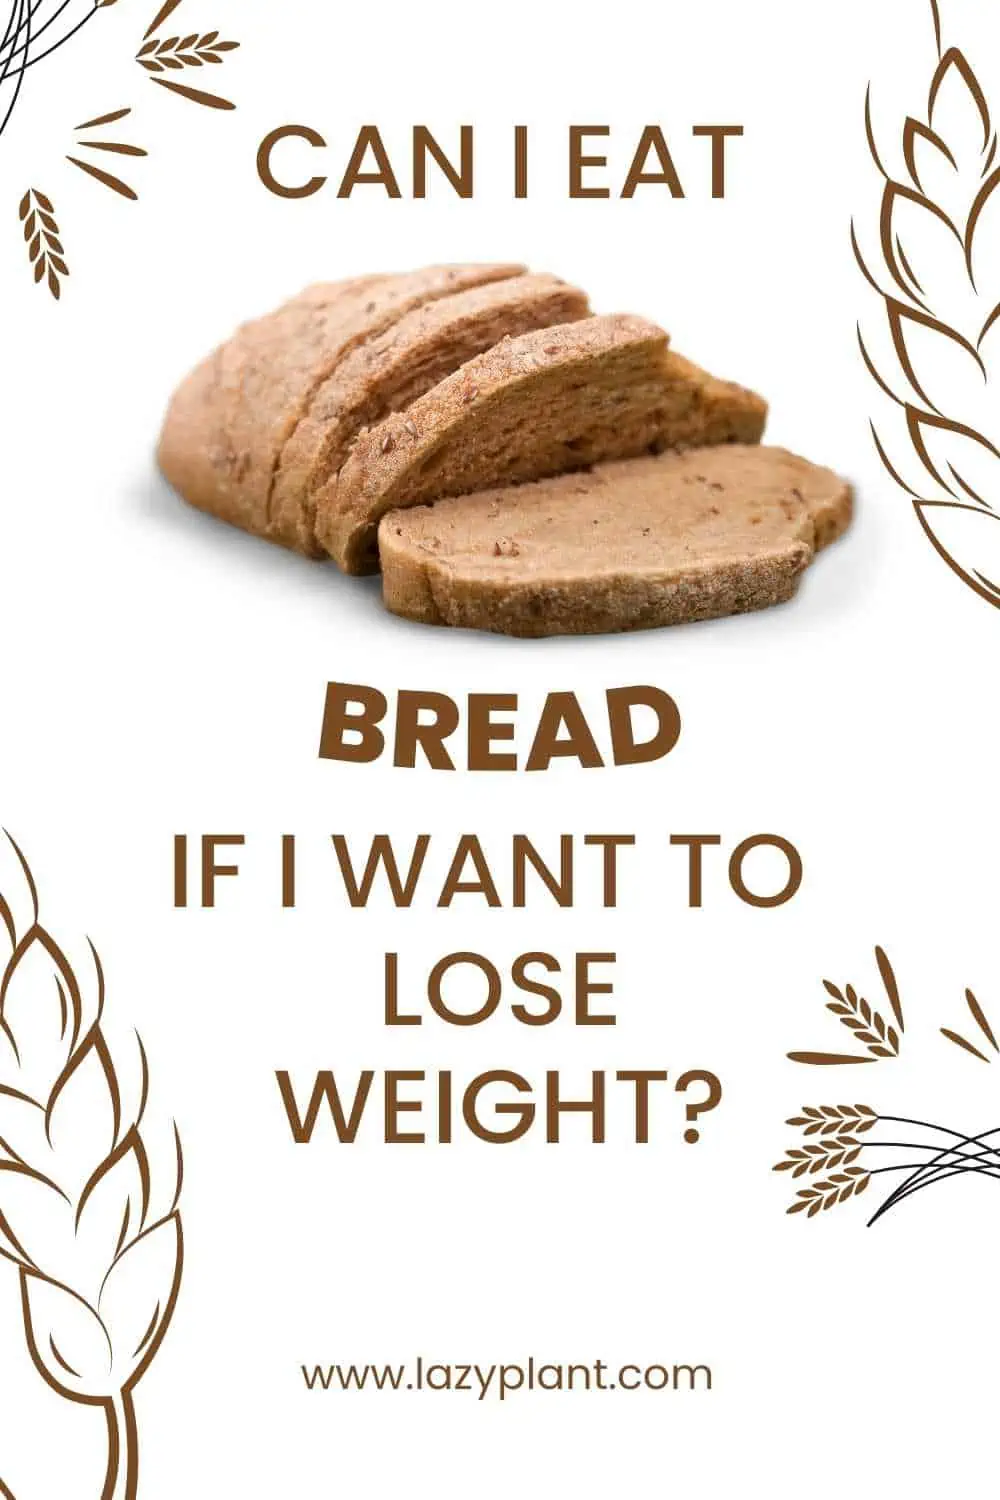 How many slices of bread a day for weight loss?